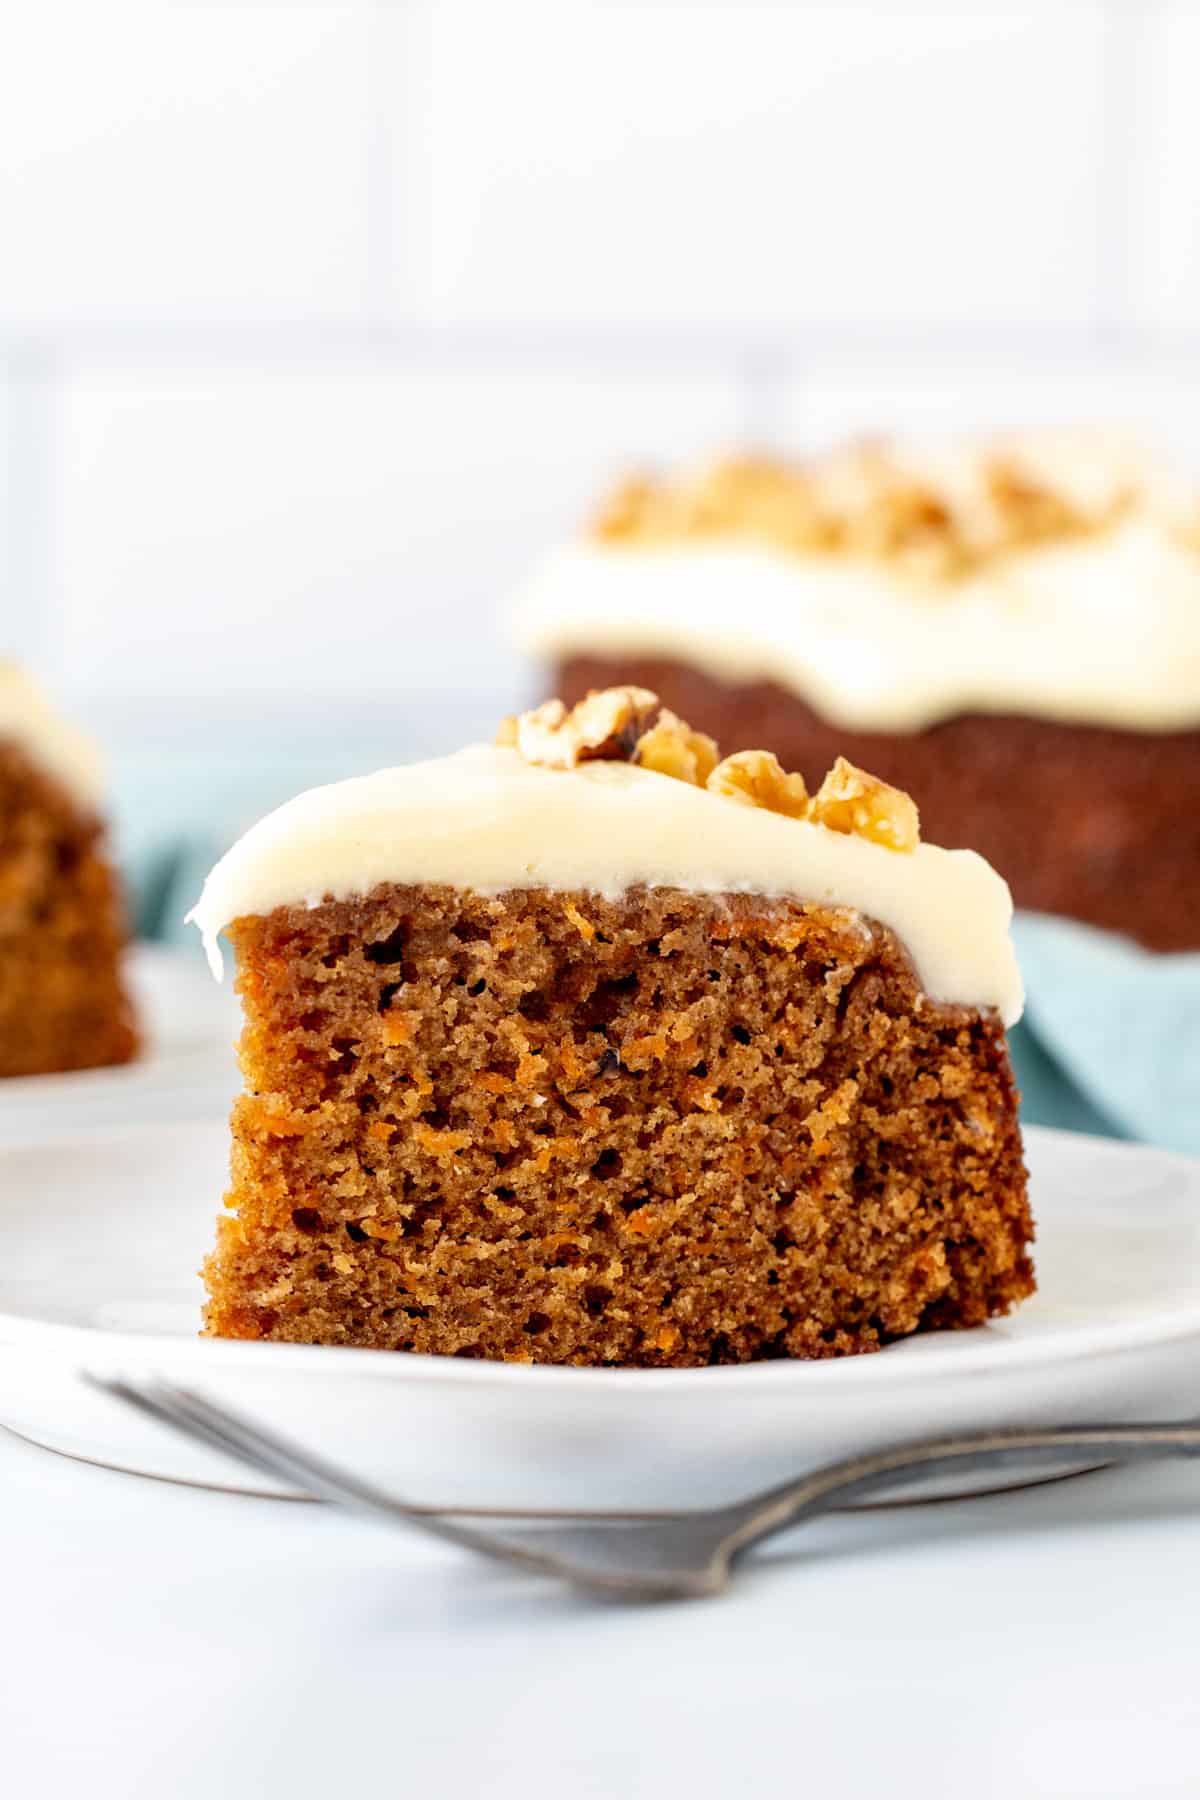 Slice of mini carrot cake with cream cheese frosting